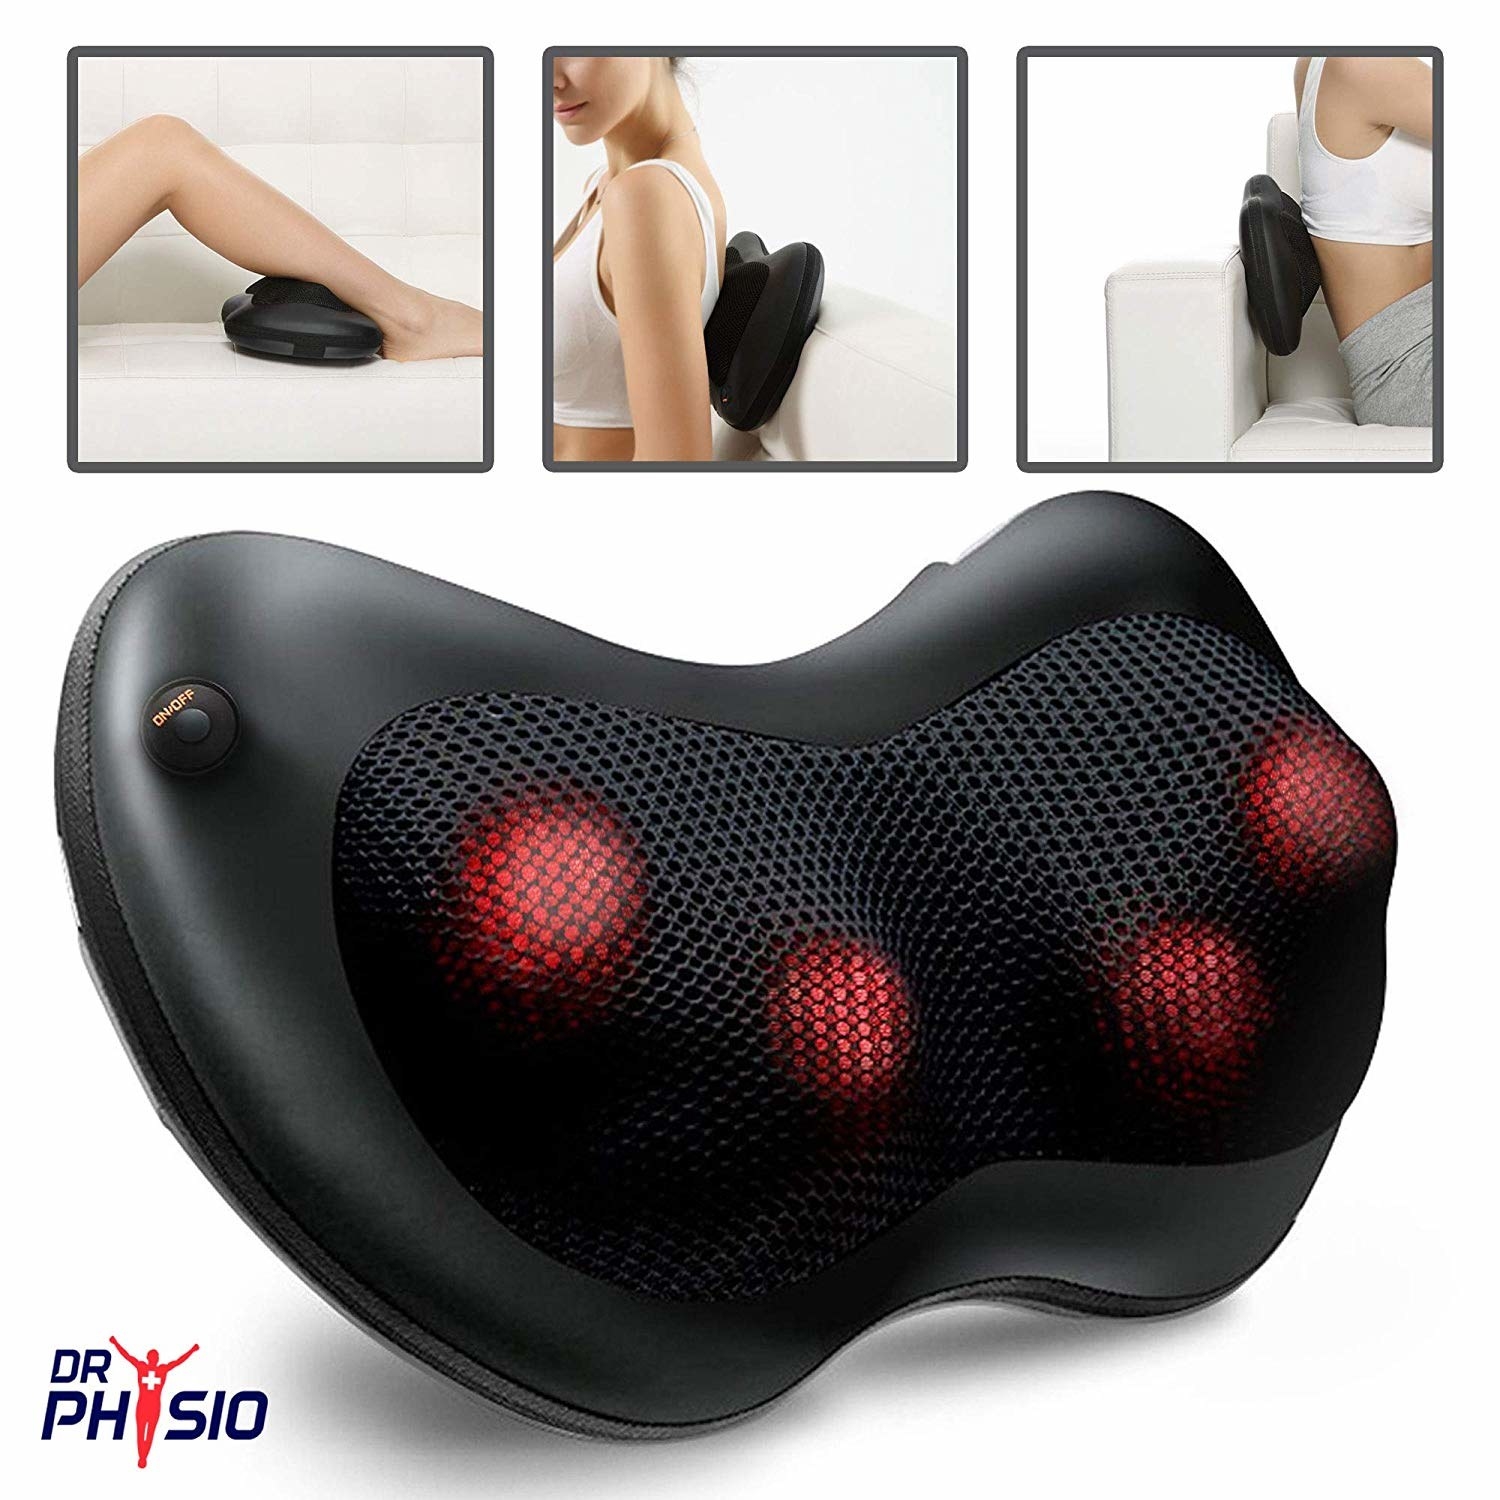 A black body massager with a collage of a woman using it on different parts of her body.